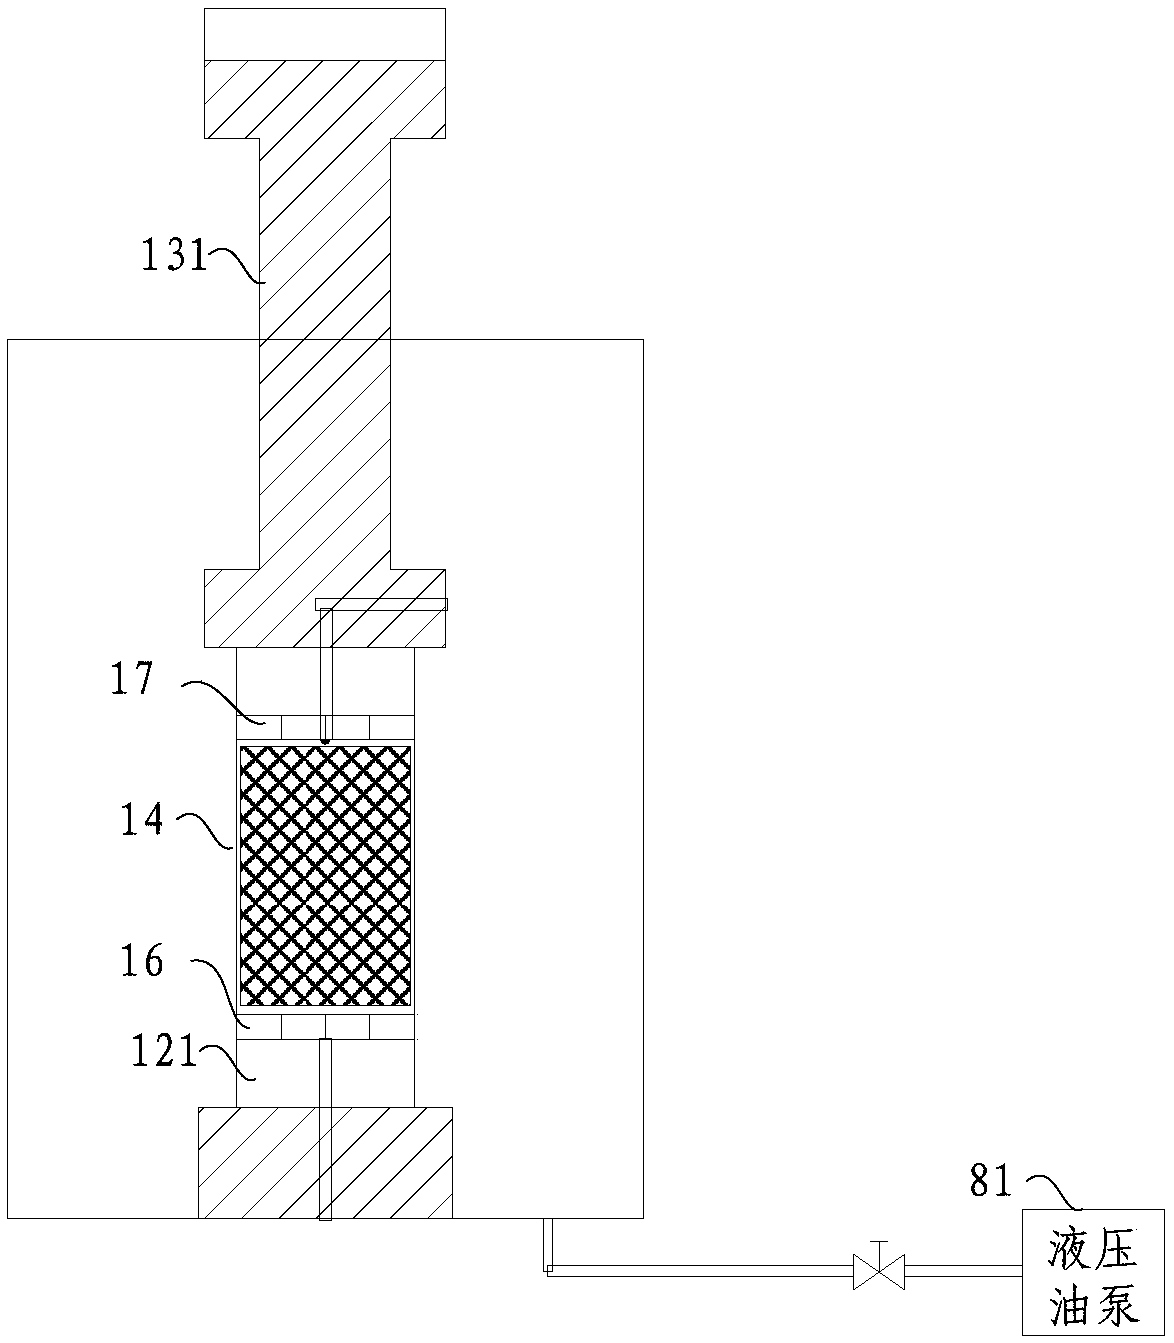 Device and method for testing permeability of hydrate coal containing gas